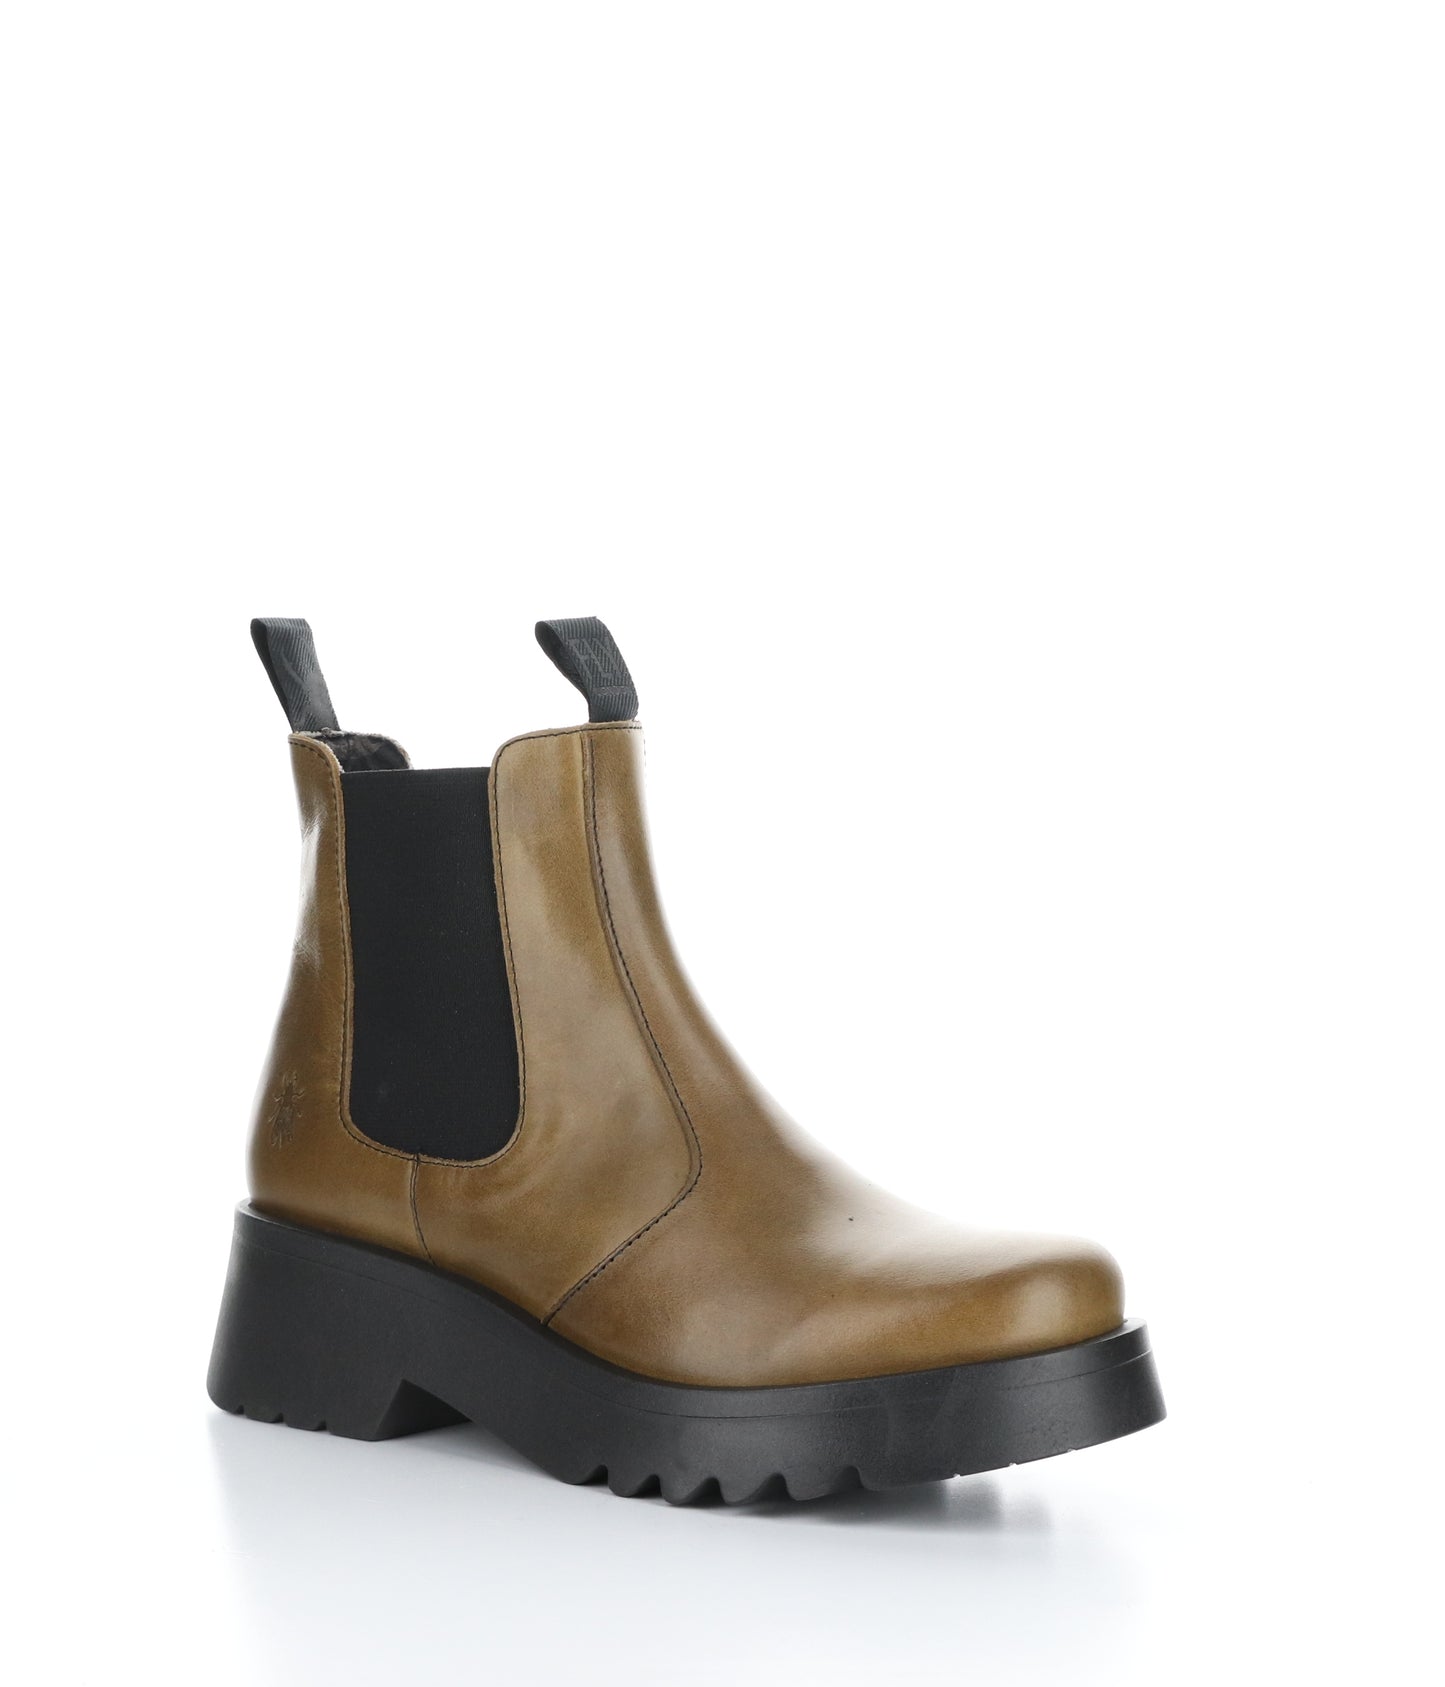 The right angled profile of a brown Chelsea boot with black elastic side panel and black rubber lug sole.